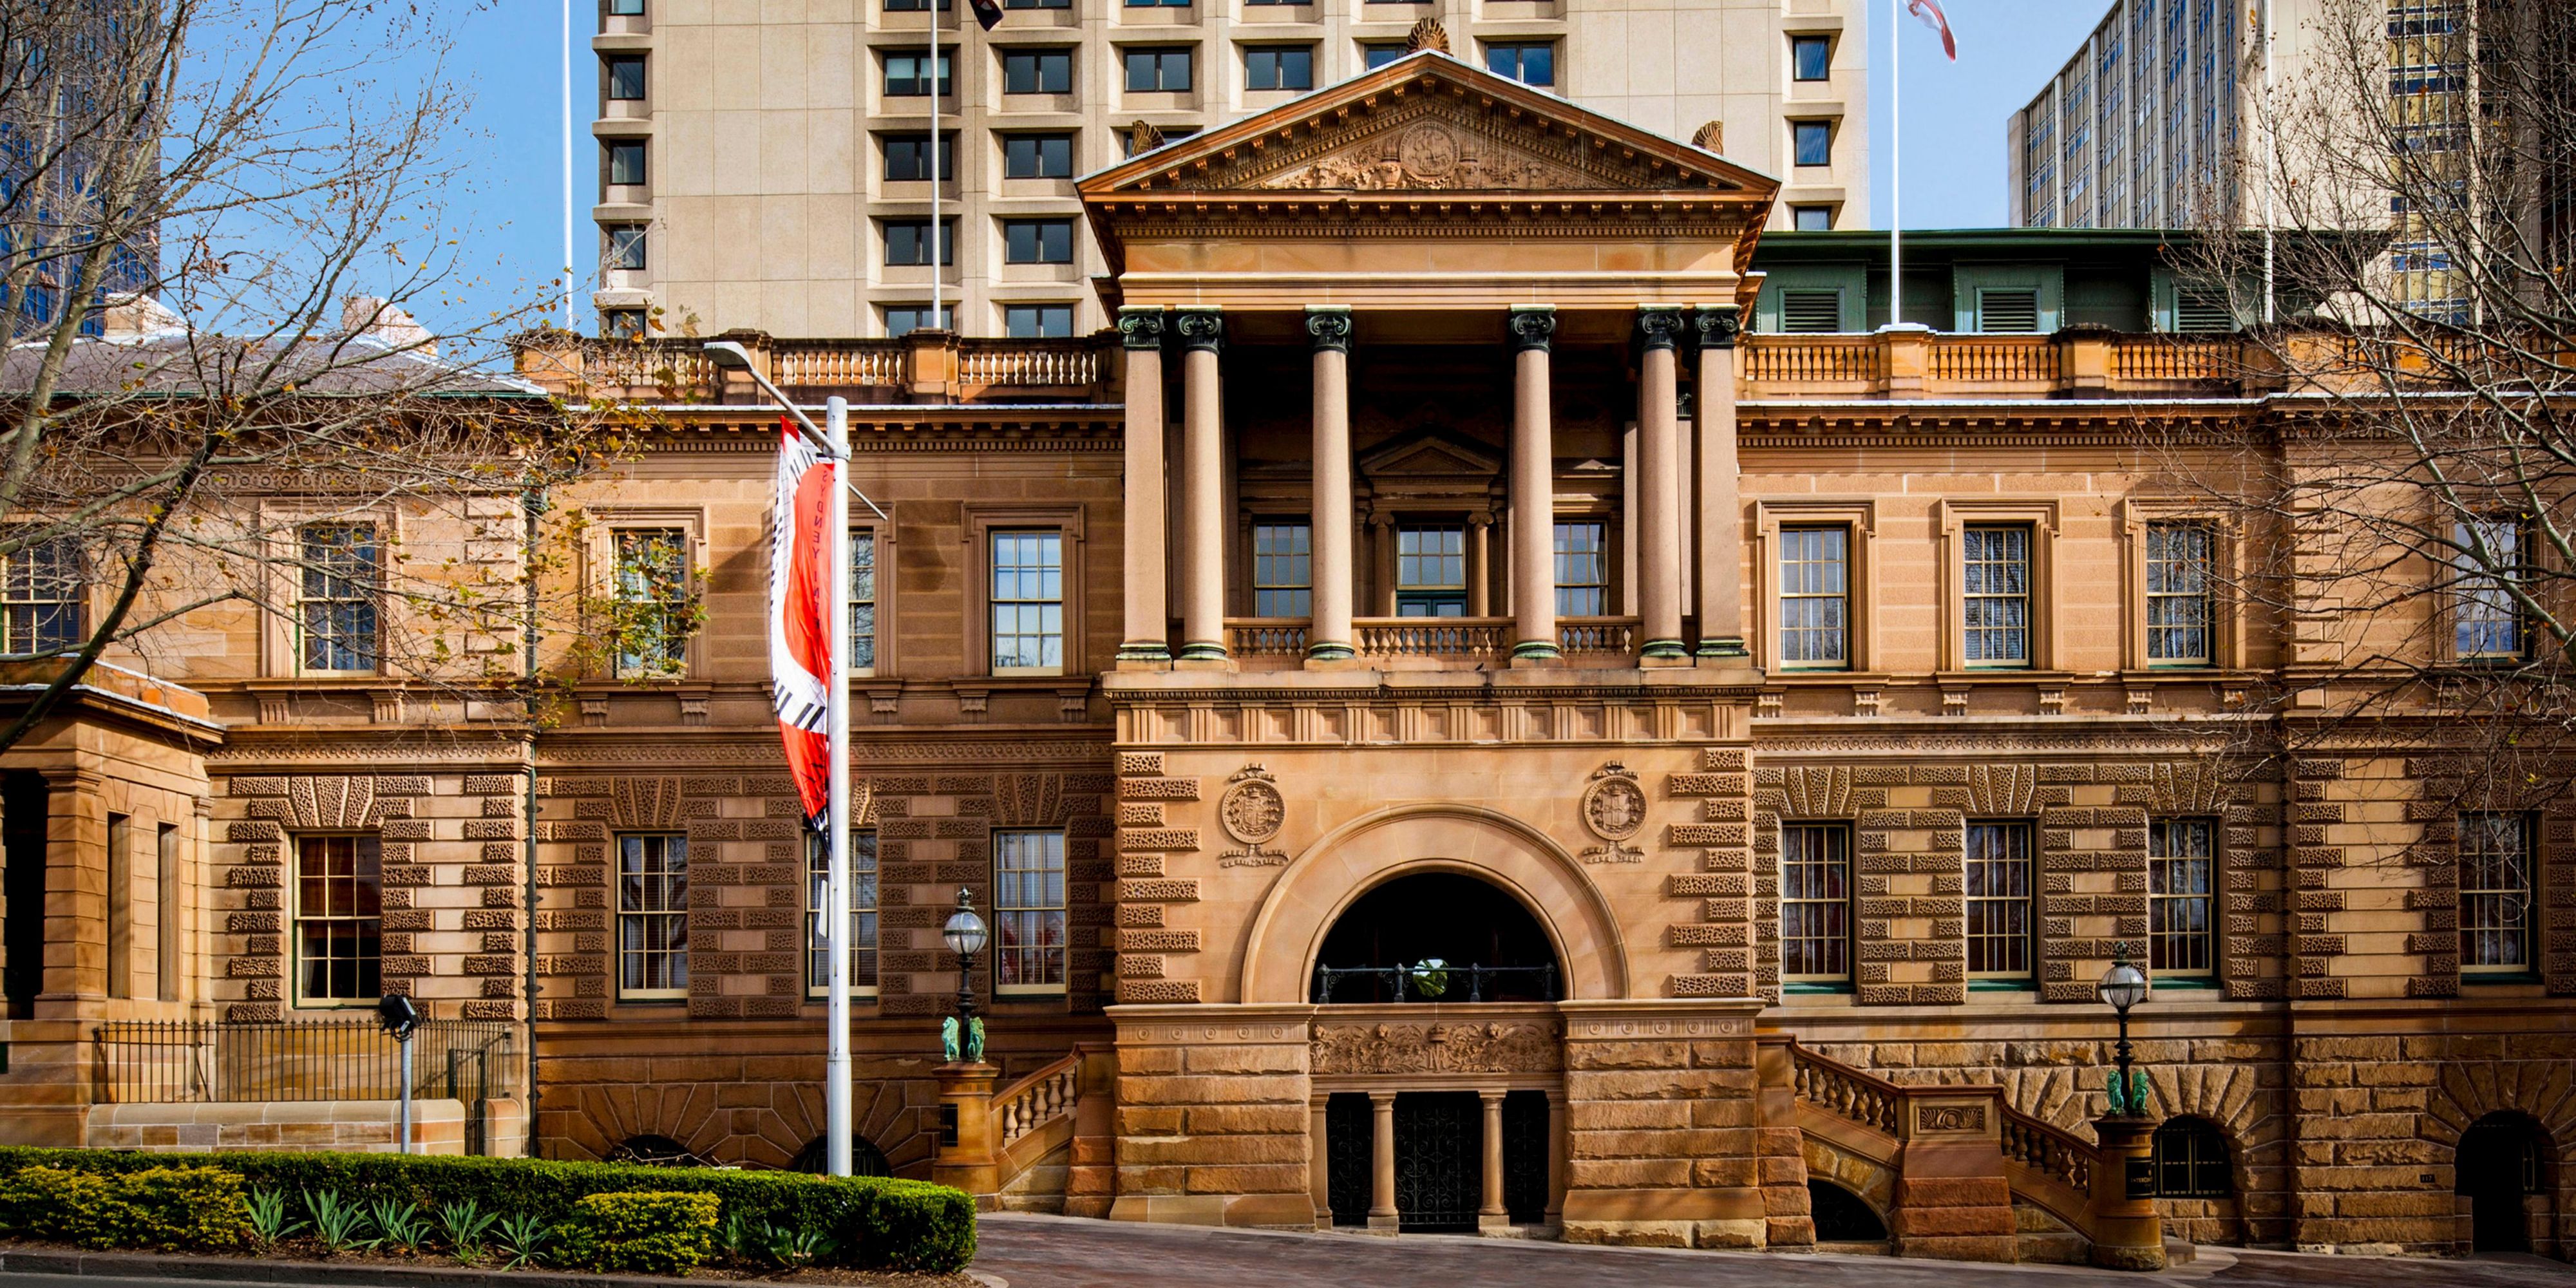 With a rich 19th century heritage, the hotel rests within the Treasury Building of 1851 – the first purpose-built government office in Sydney – gifting its intricate architectural façade. It is home to the oldest operating lift in the Southern Hemisphere, the first vault in Australia, and is the birthplace of the first grapes cultivated in Sydney.